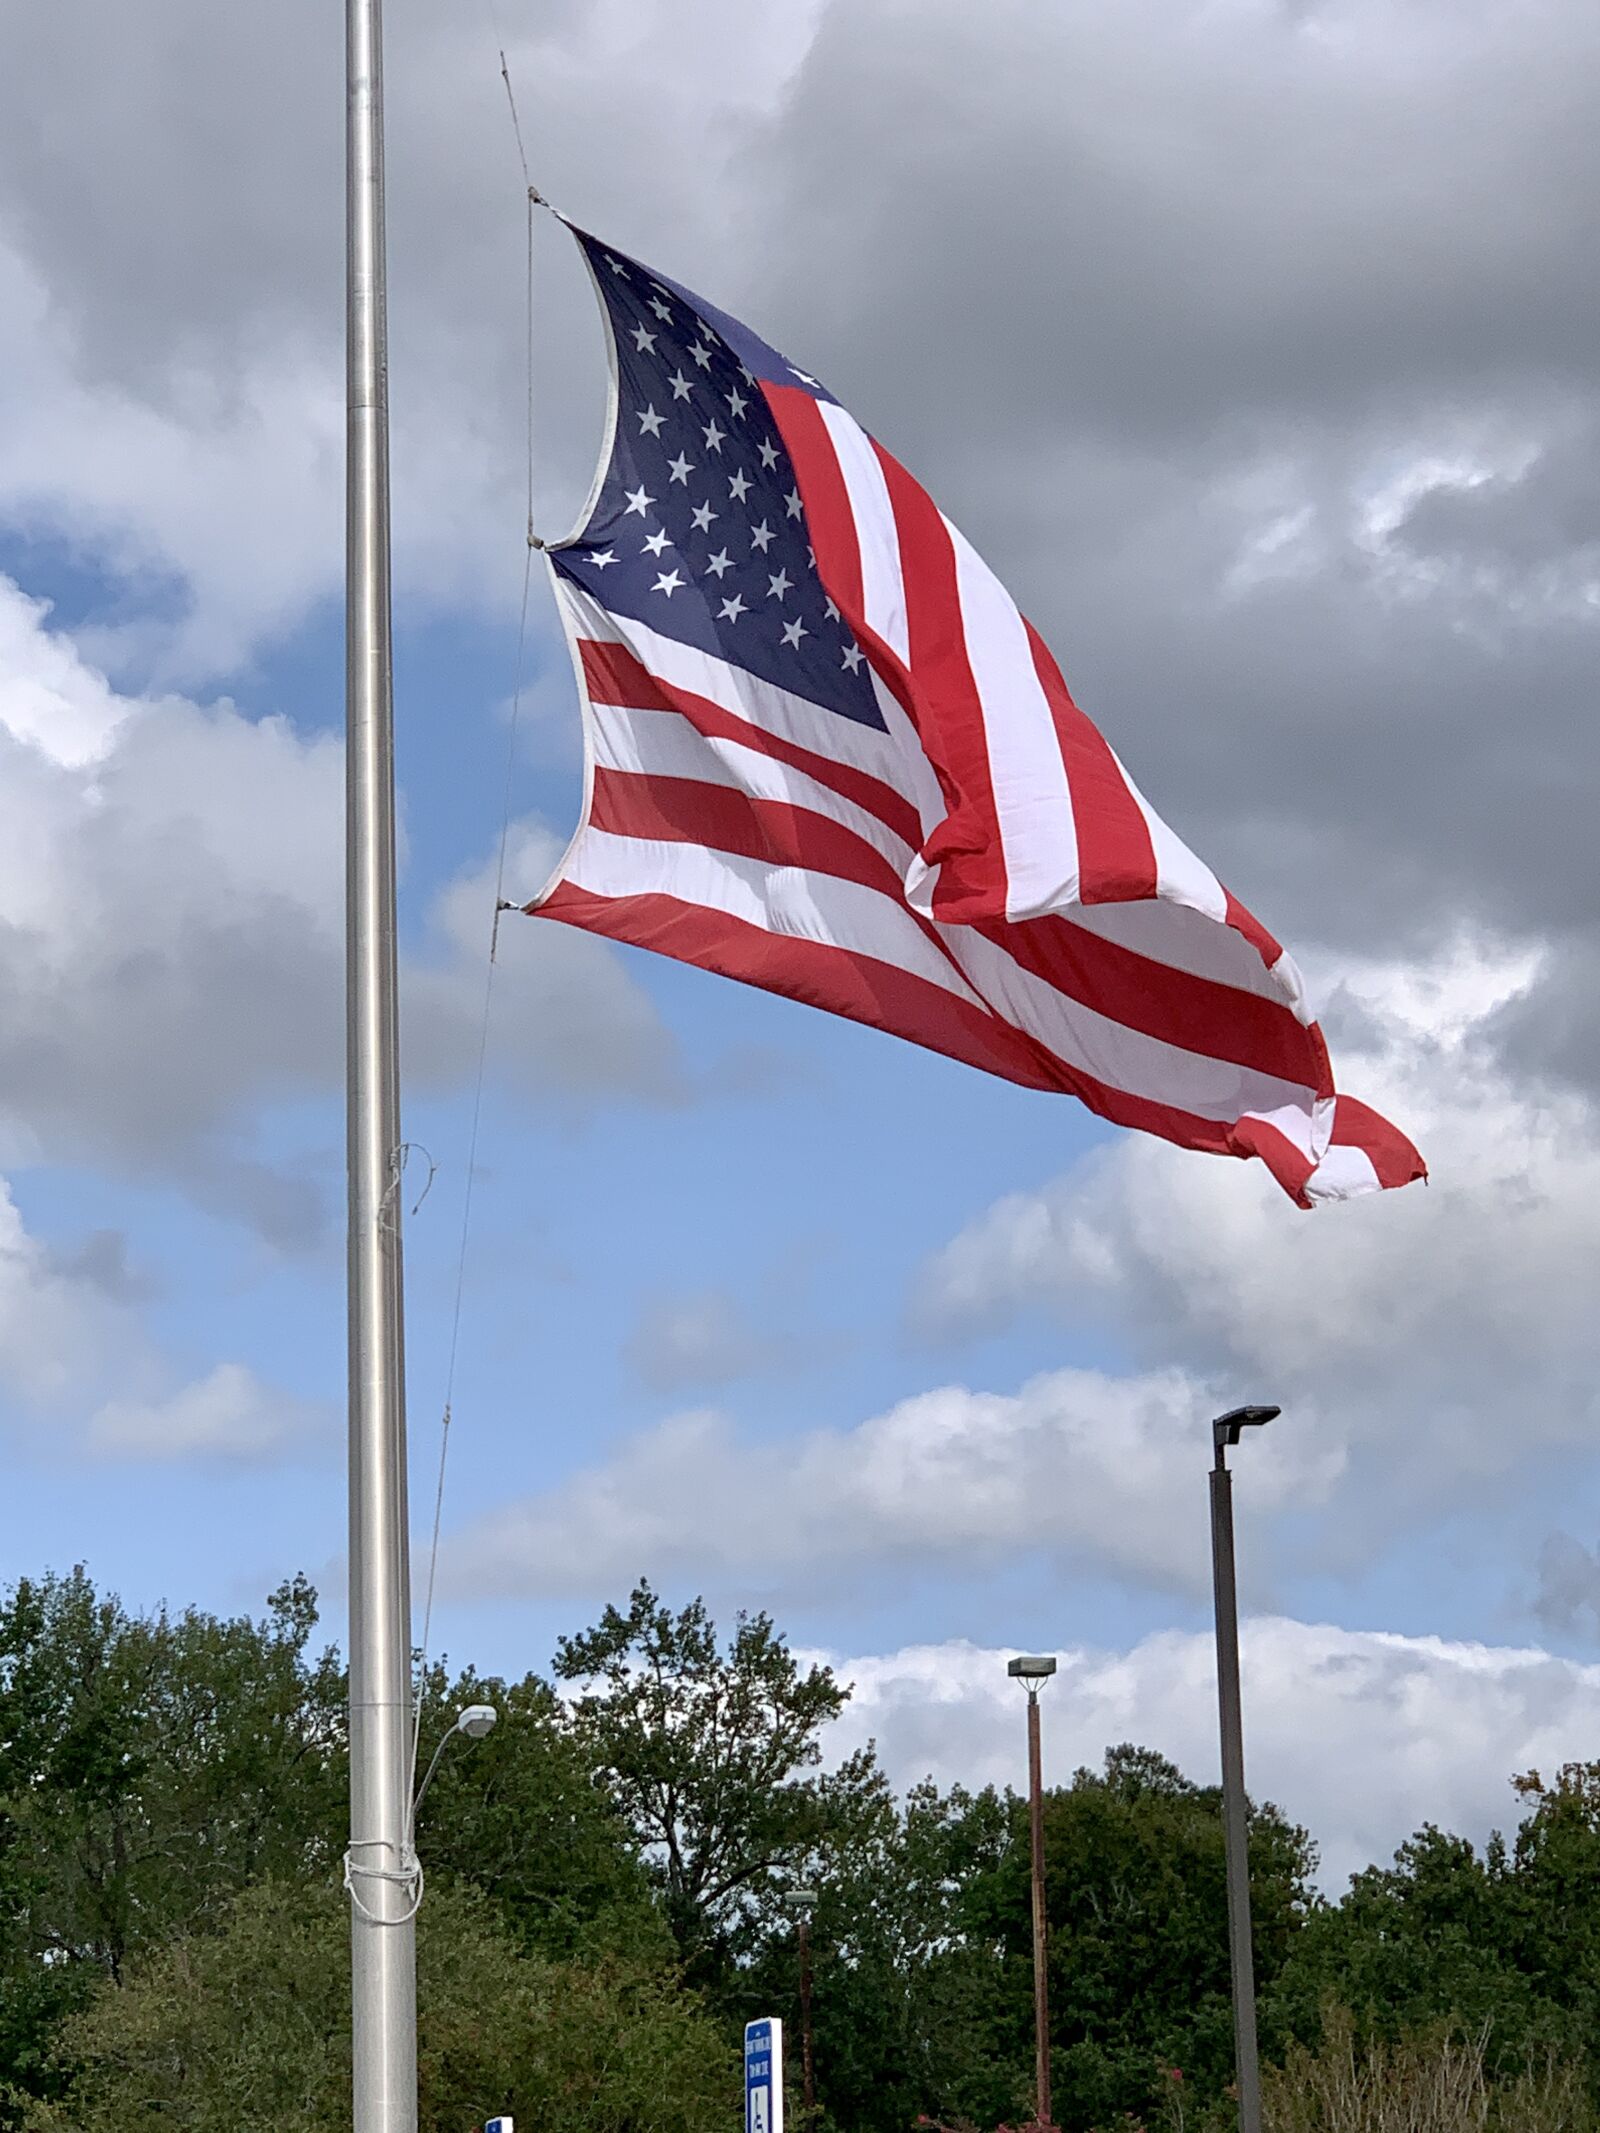 Apple iPhone XS Max + iPhone XS Max back dual camera 6mm f/2.4 sample photo. Flag, america, wind photography